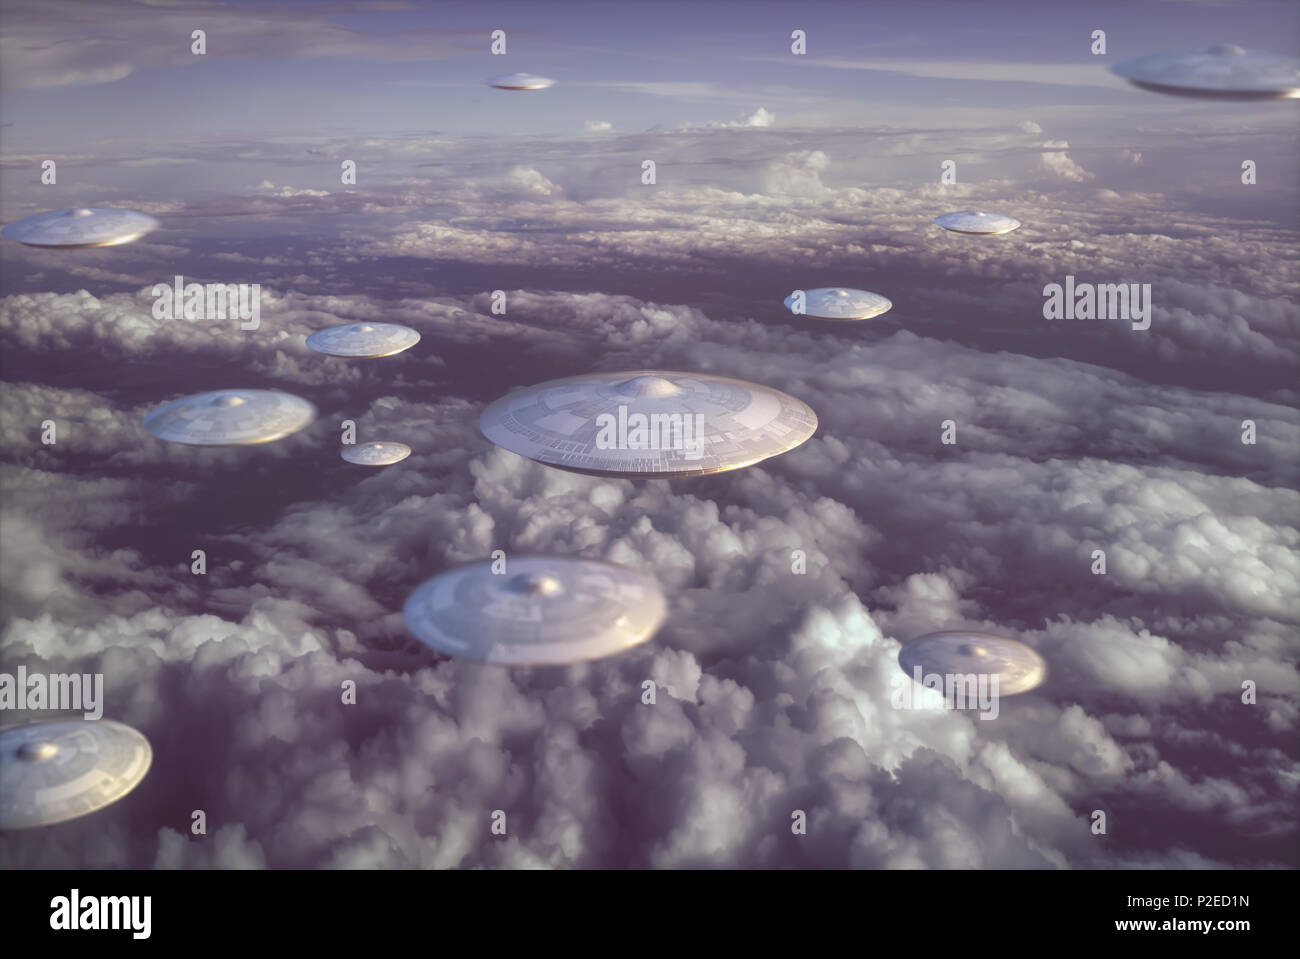 3D illustration. Invasion of alien spaceships. Sky filled with mother ships and small spacecraft. Stock Photo